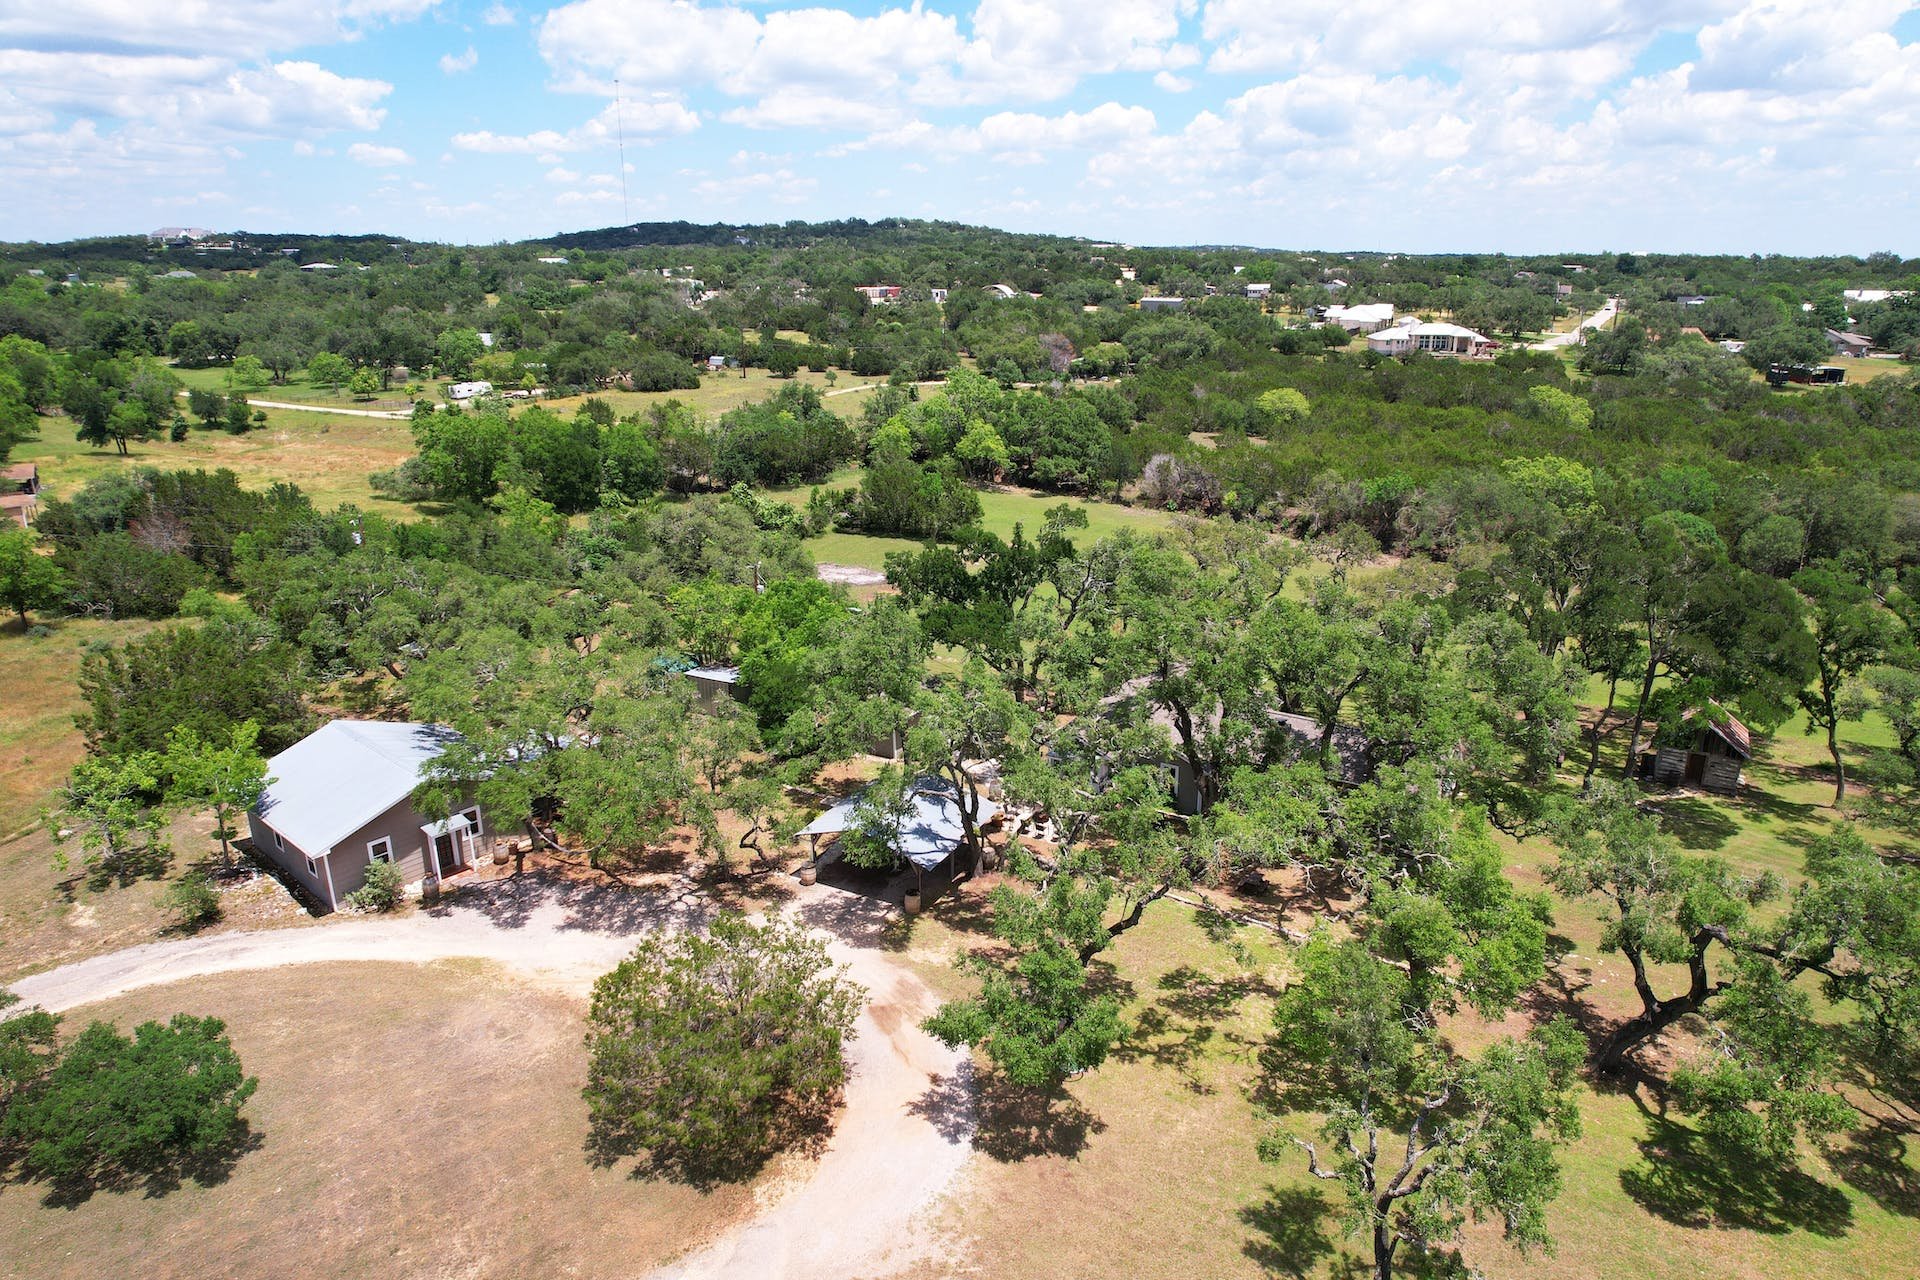 homes for sale in Austin texas